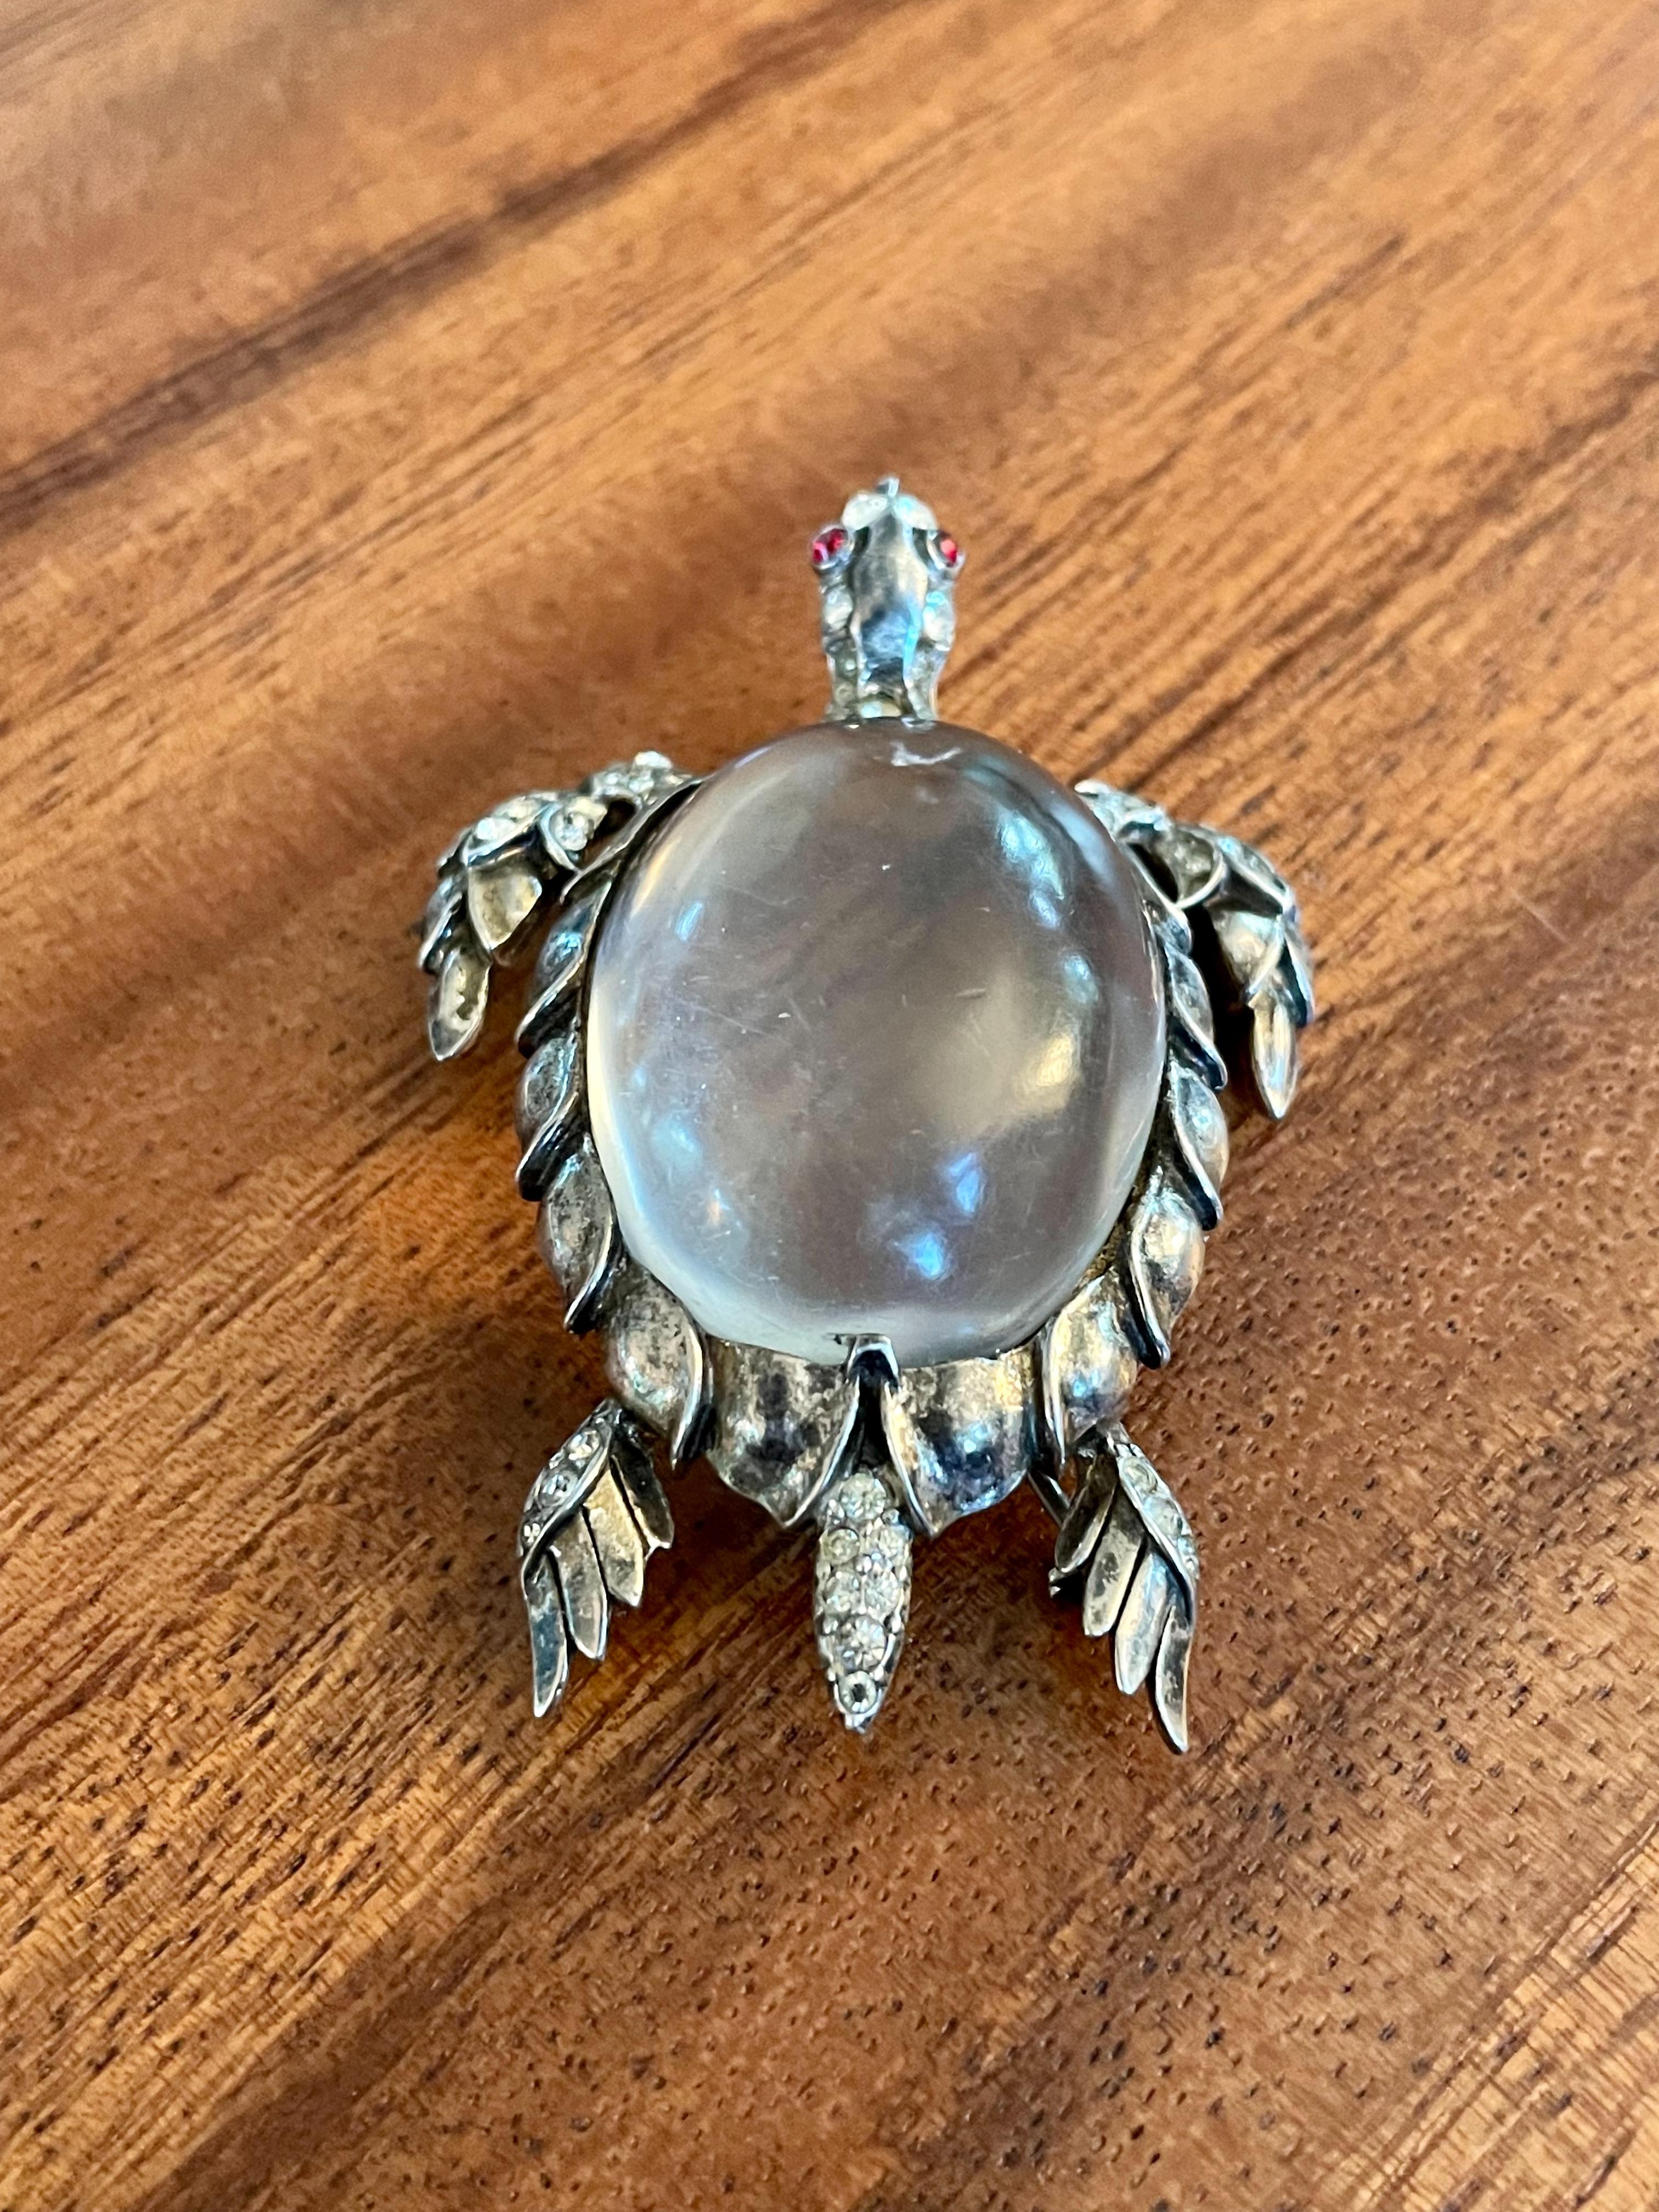 This striking vintage 1940's Trifari brooch features a jelly belly sea turtle with a clear Lucite belly and red rhinestone eyes.

Stamped:  TRIFARI STERLING PATENT NO.

Dimensions: 1 5/8